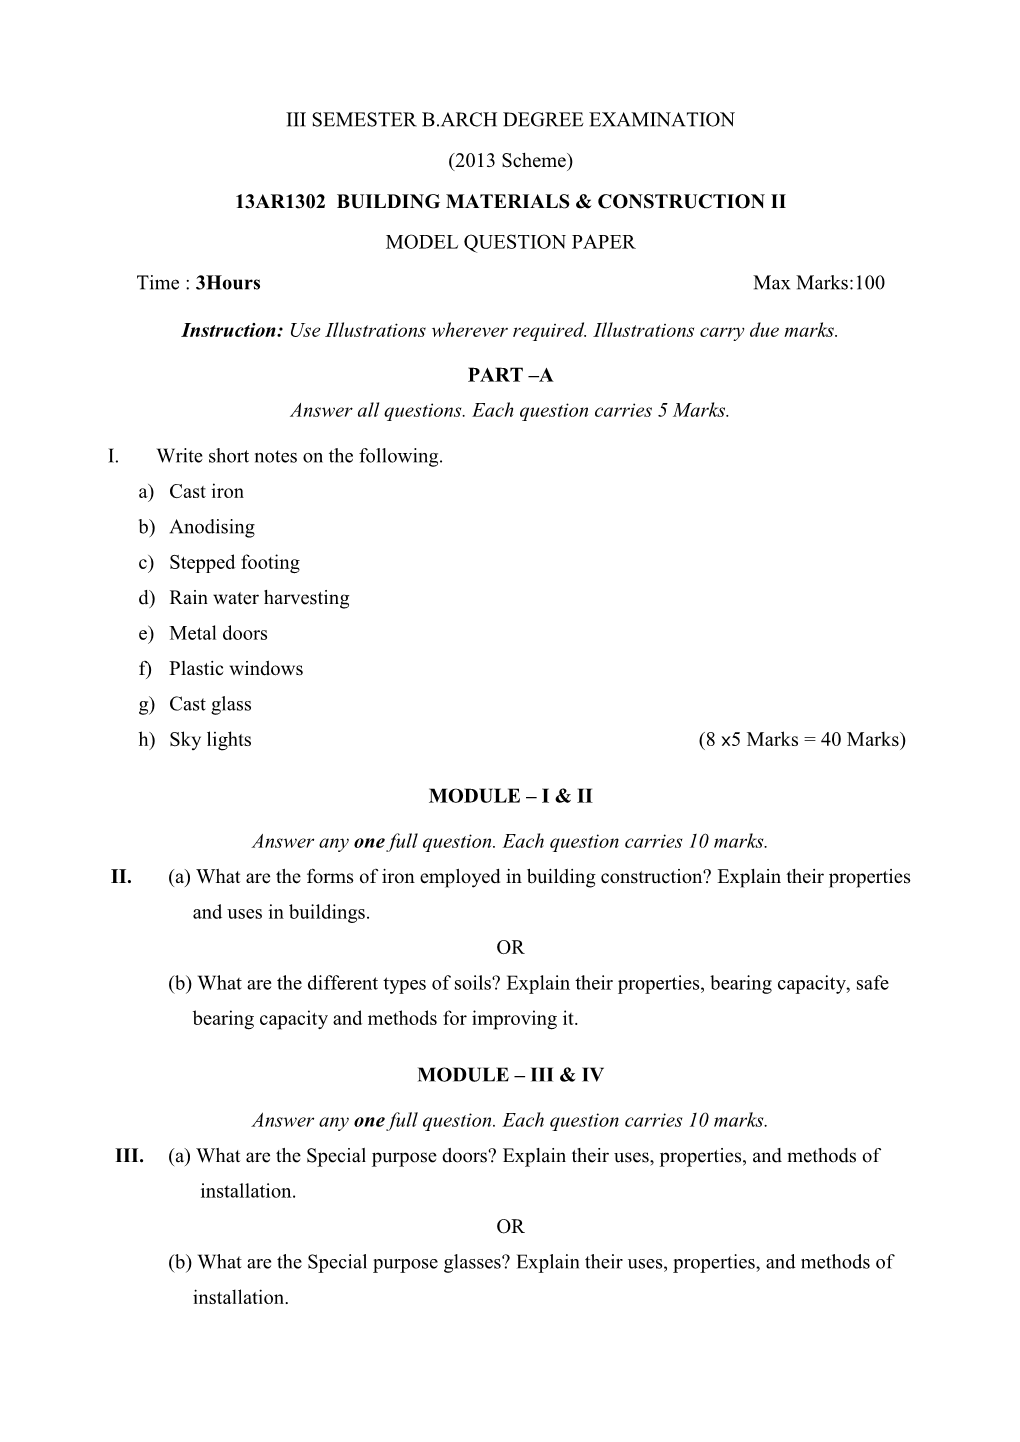 III SEMESTER B.ARCH DEGREE EXAMINATION (2013 Scheme) 13AR1302 BUILDING MATERIALS & CONSTRUCTION II MODEL QUESTION PAPER Time : 3Hours Max Marks:100